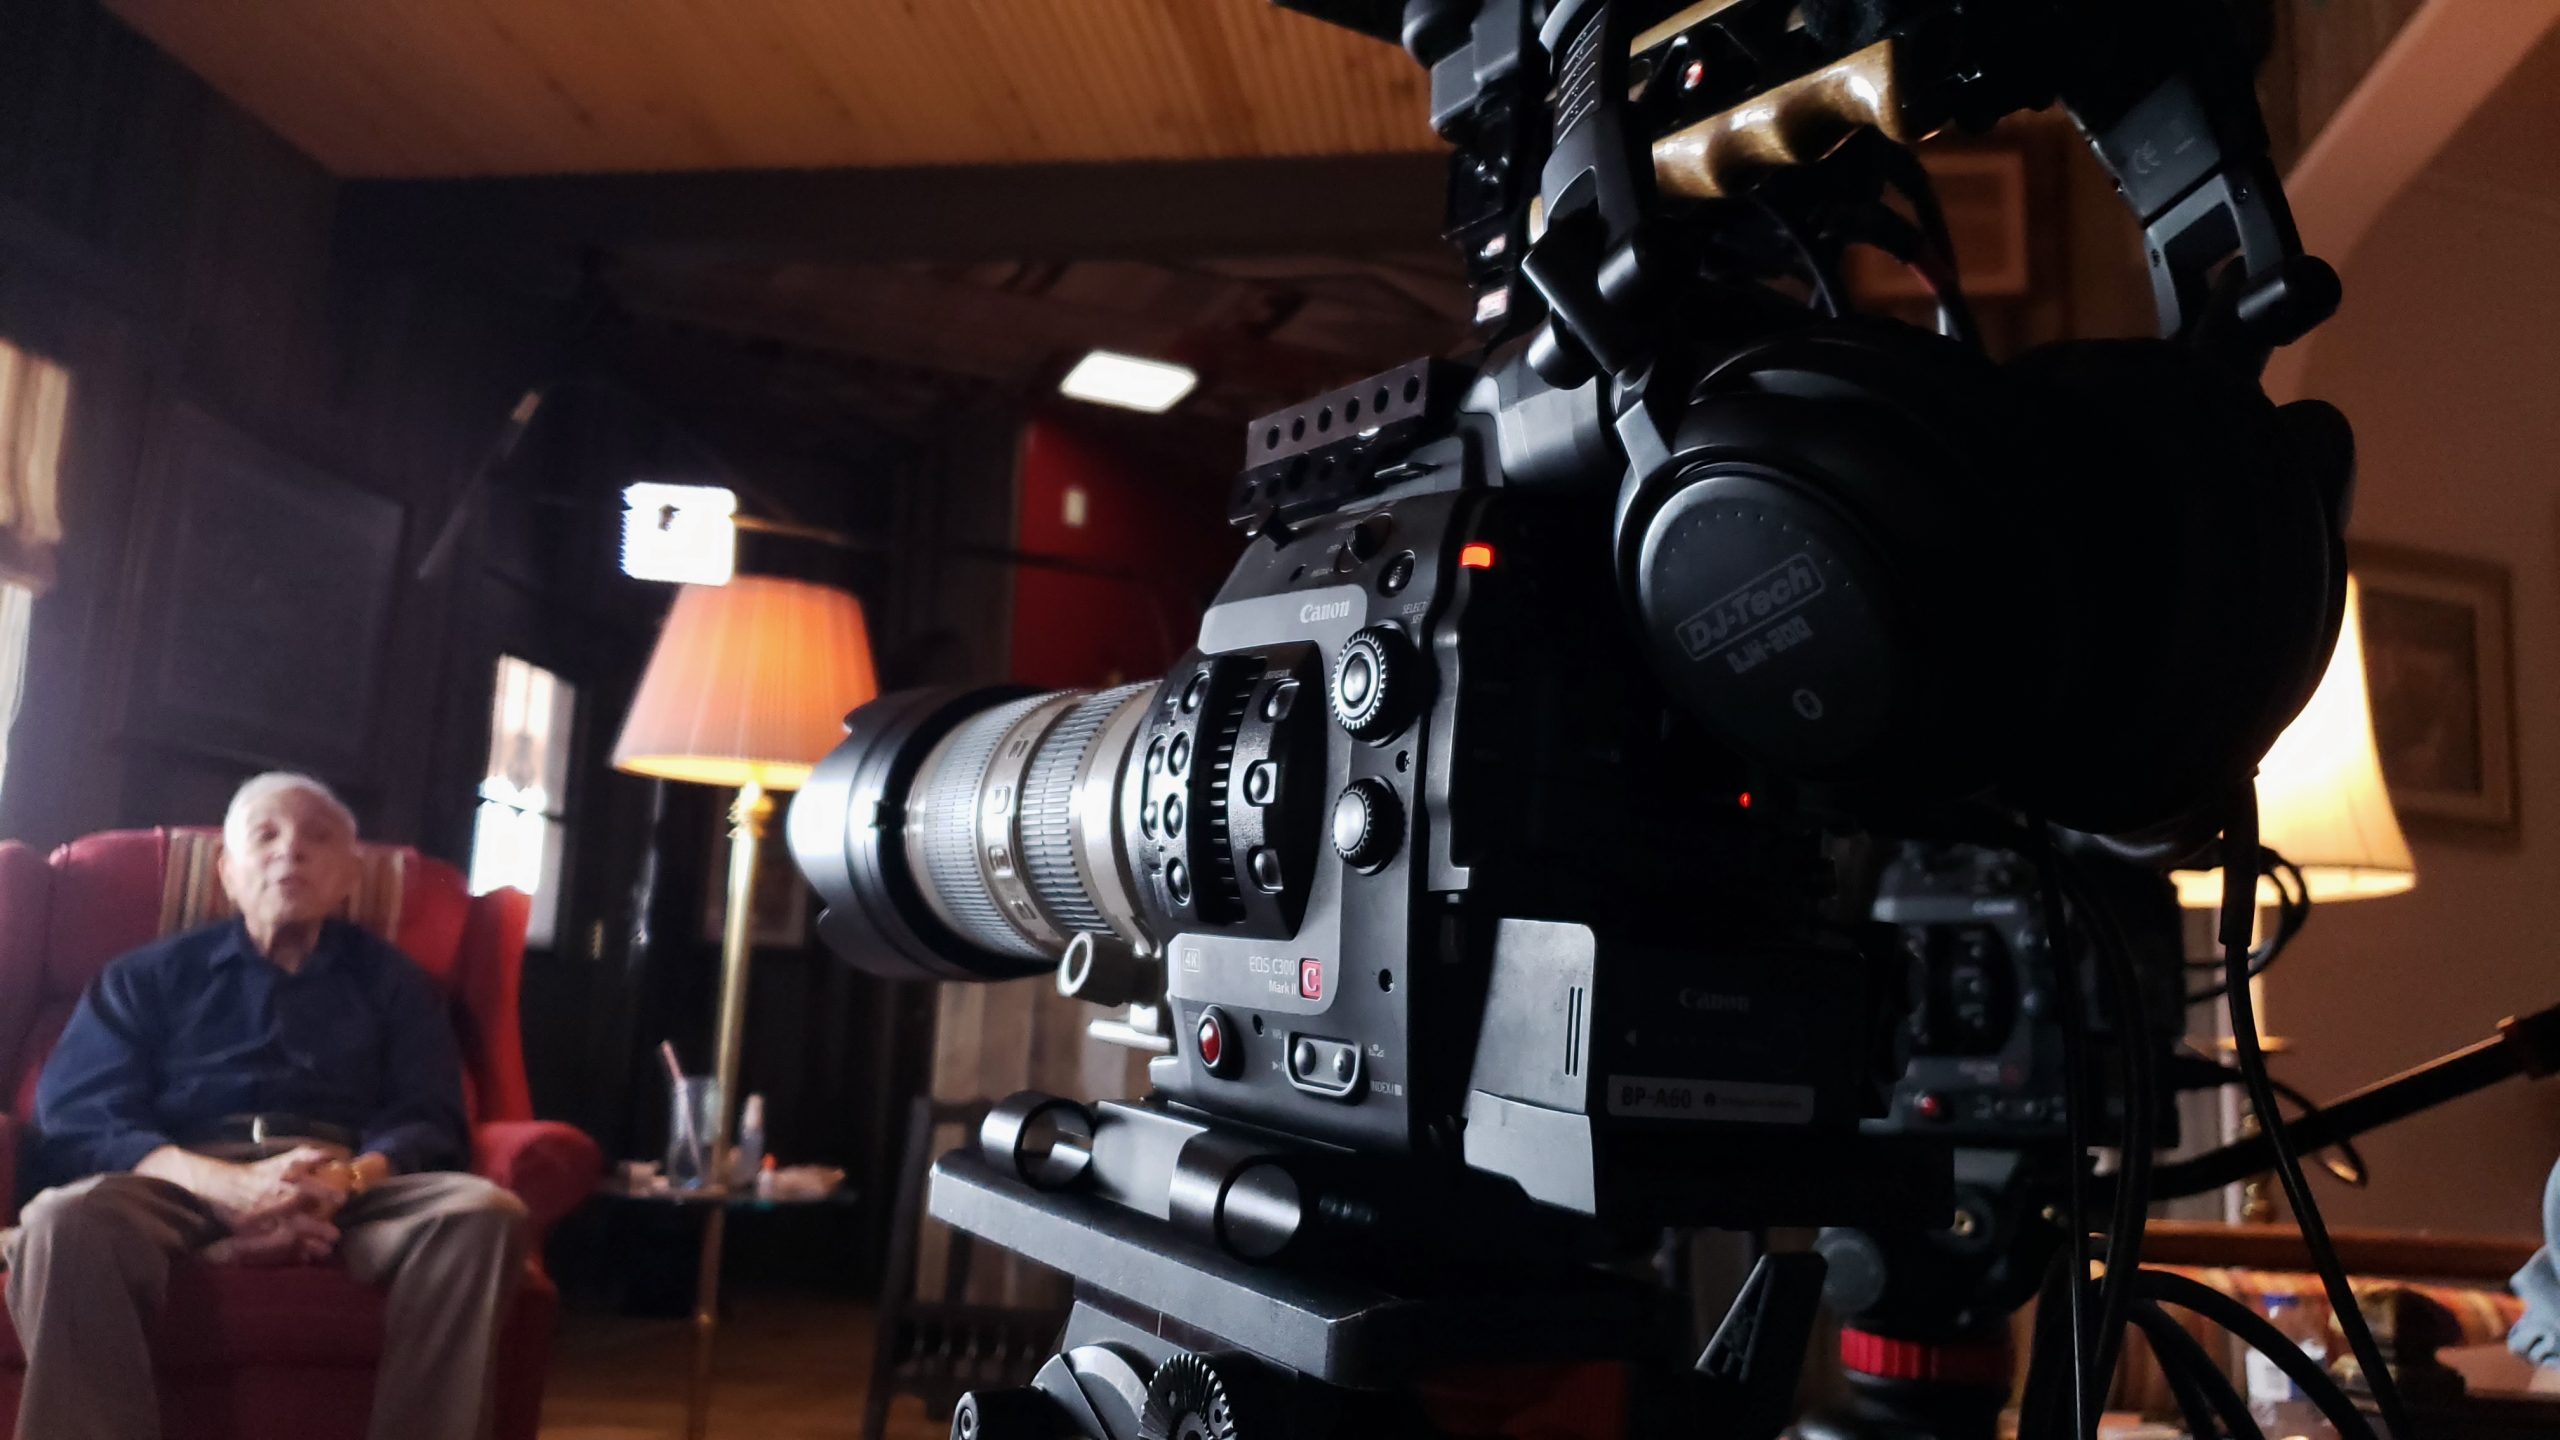 Working with a Canon C300 camera